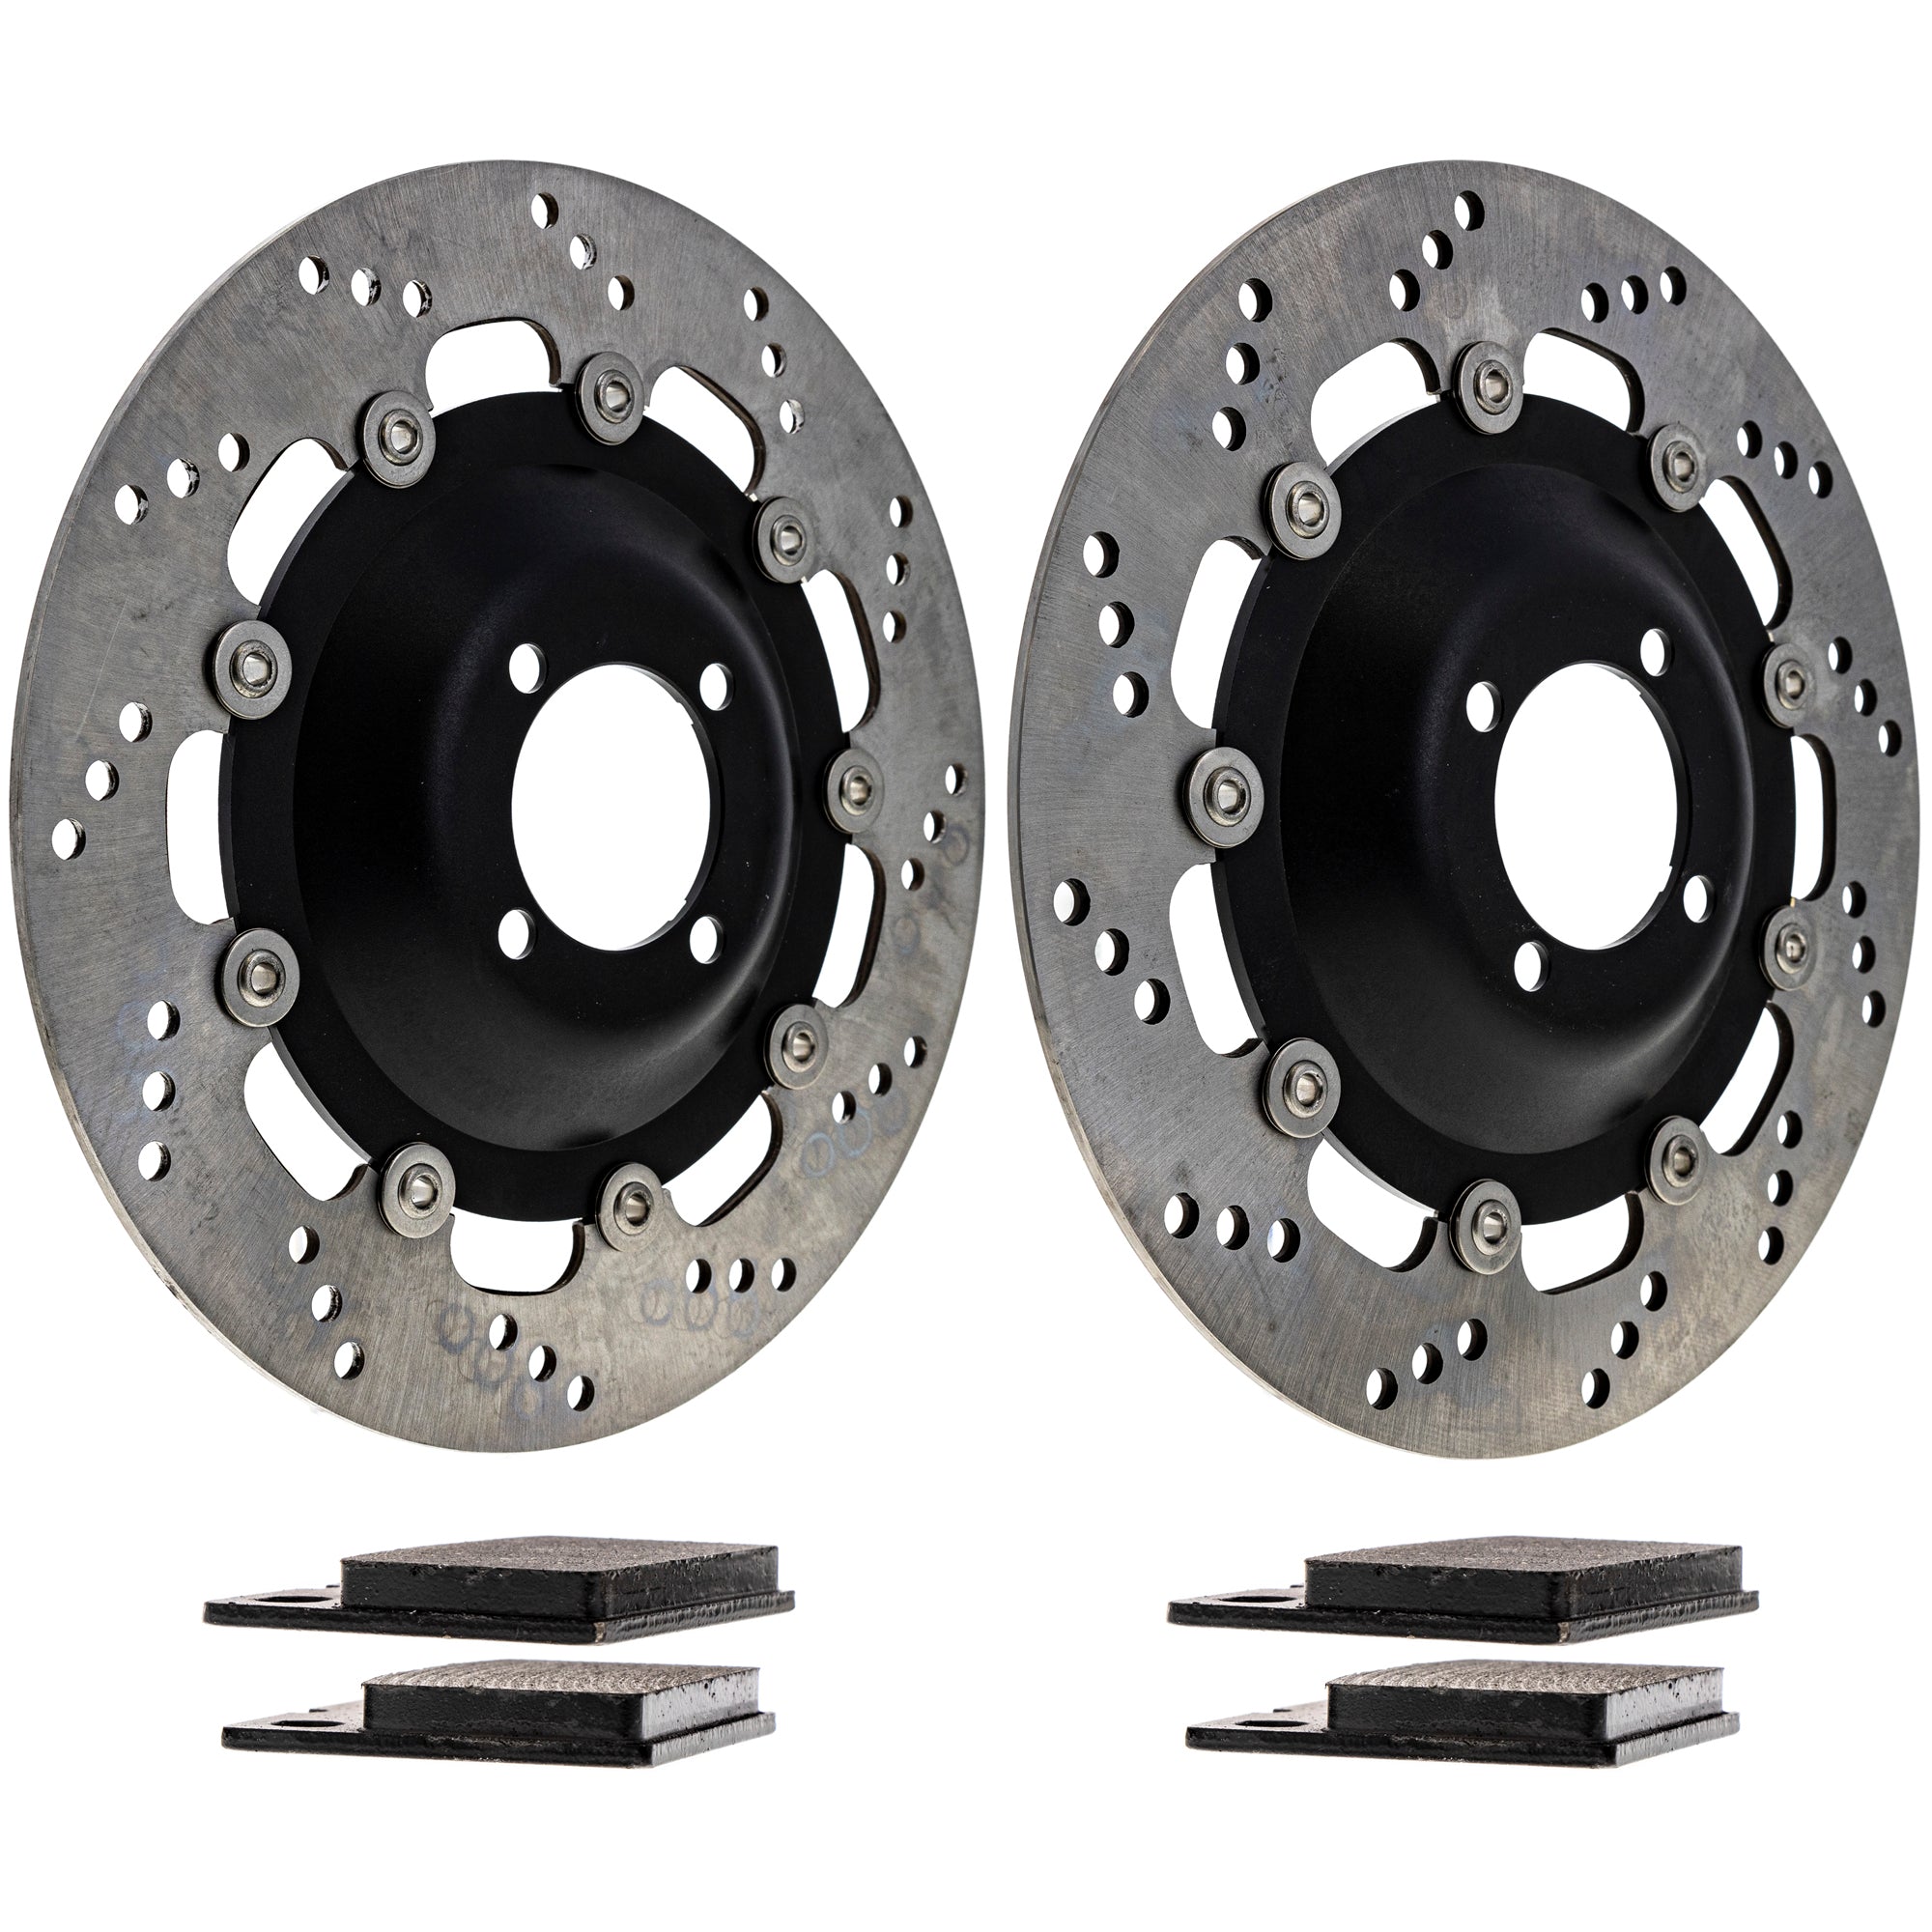 Front Brake Rotors and Pads Kit for zOTHER Kawasaki R80 R65 R100RT R100RS 34217657025 NICHE MK1006887